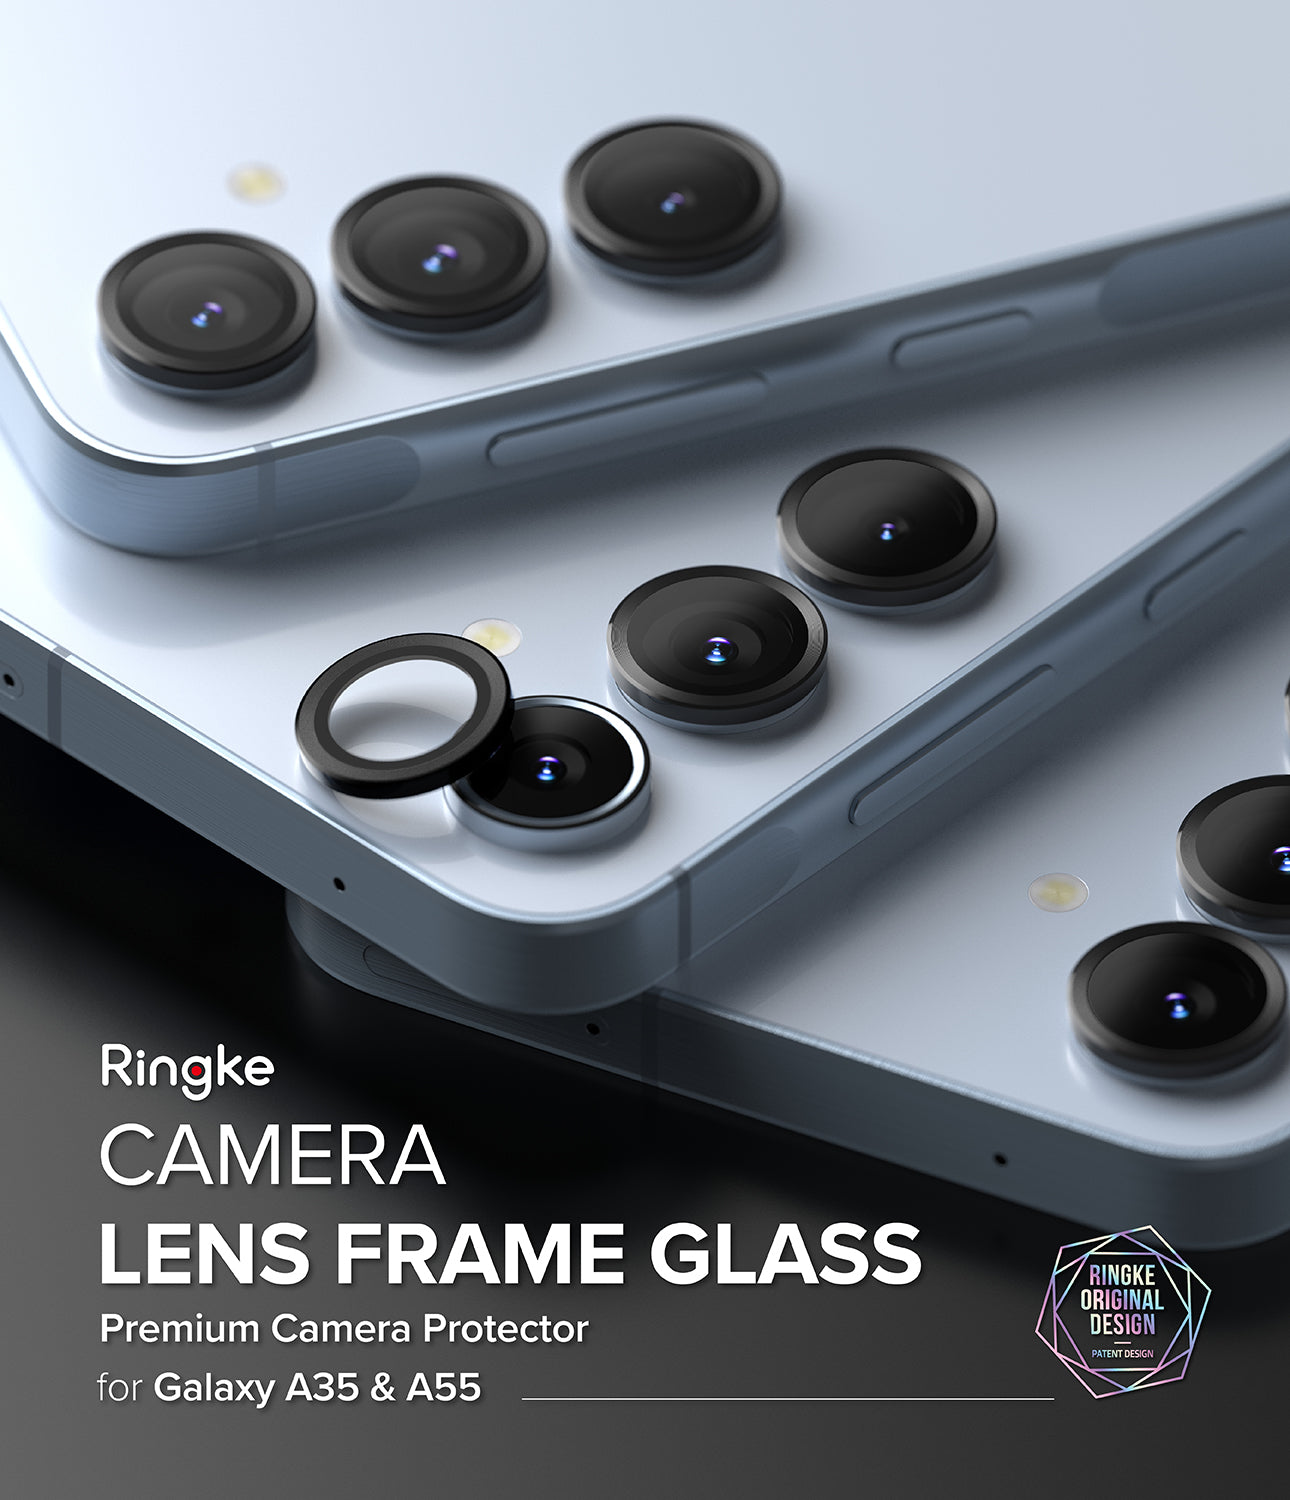 Galaxy A55 / A35 Camera Lens Frame Glass Protector - By Ringke